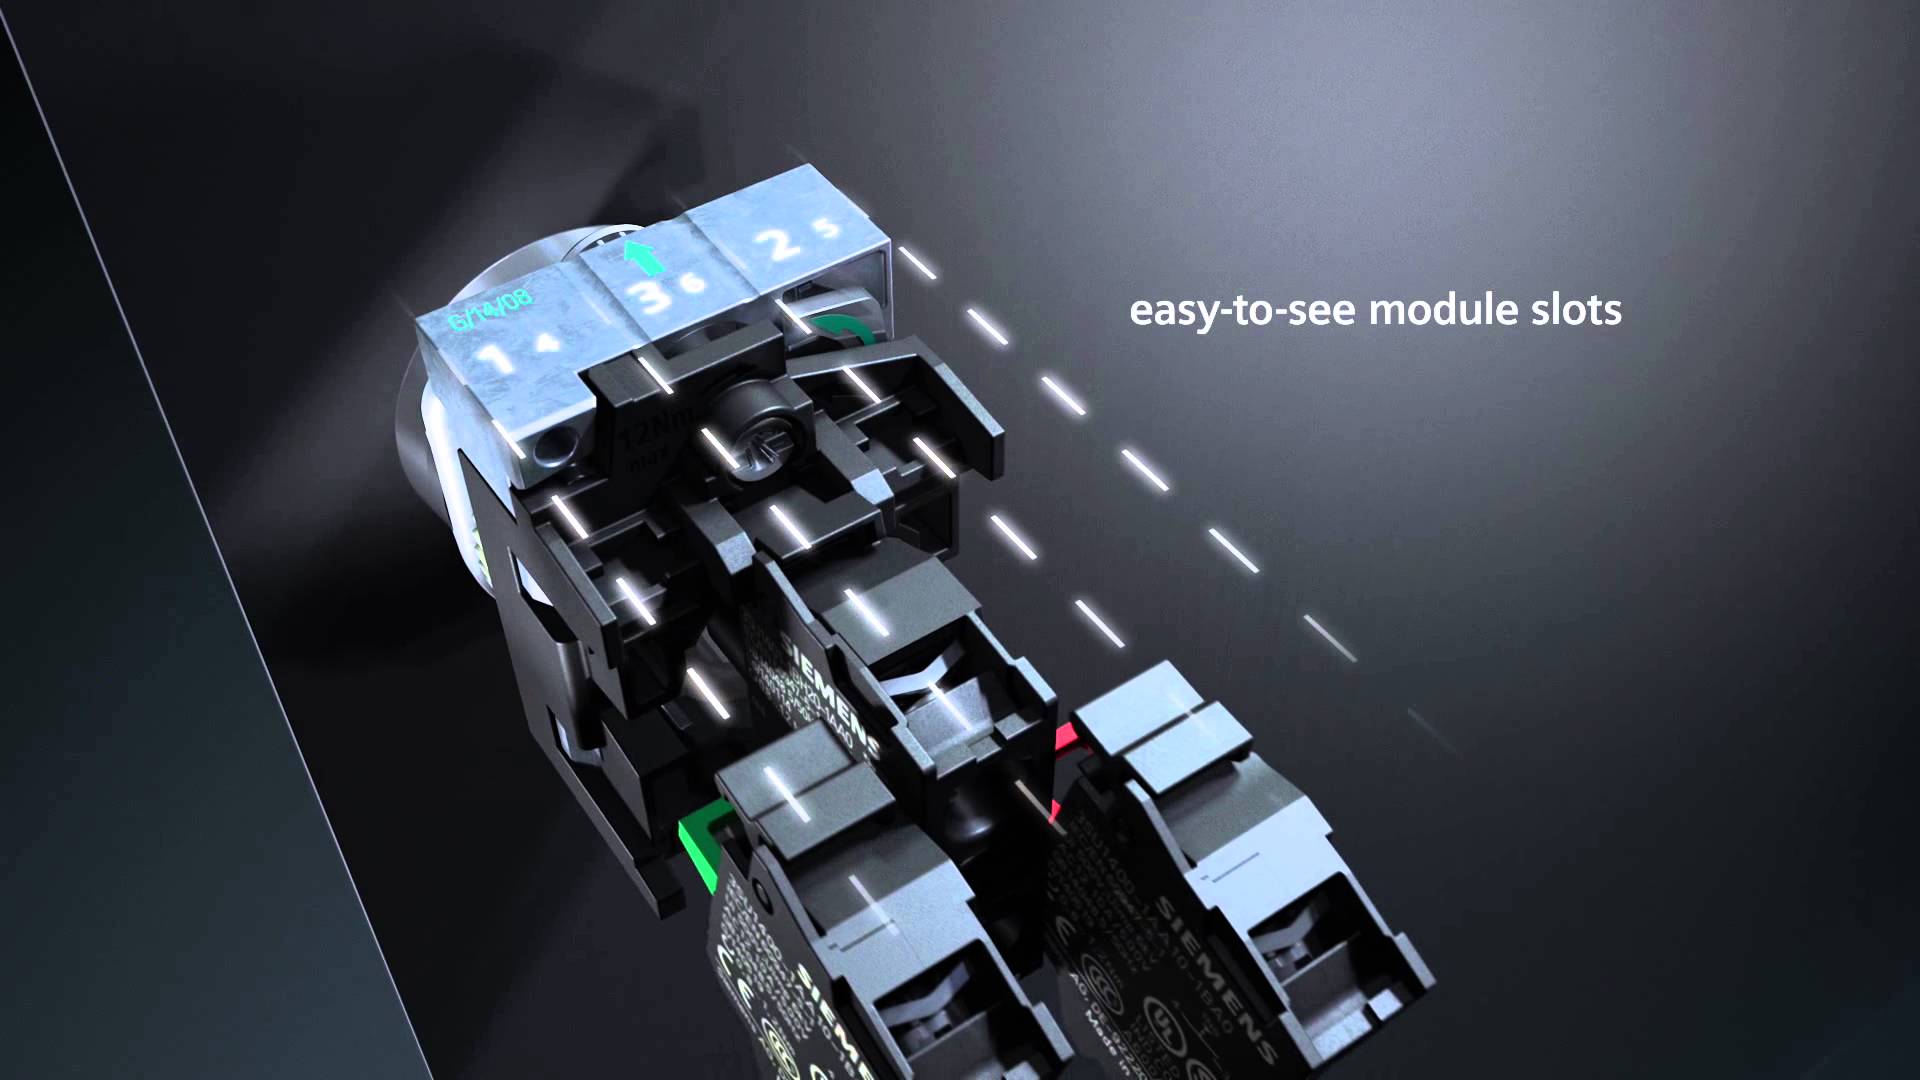 Sponsored: siemens’ sirius act – high performance push buttons & signaling devices